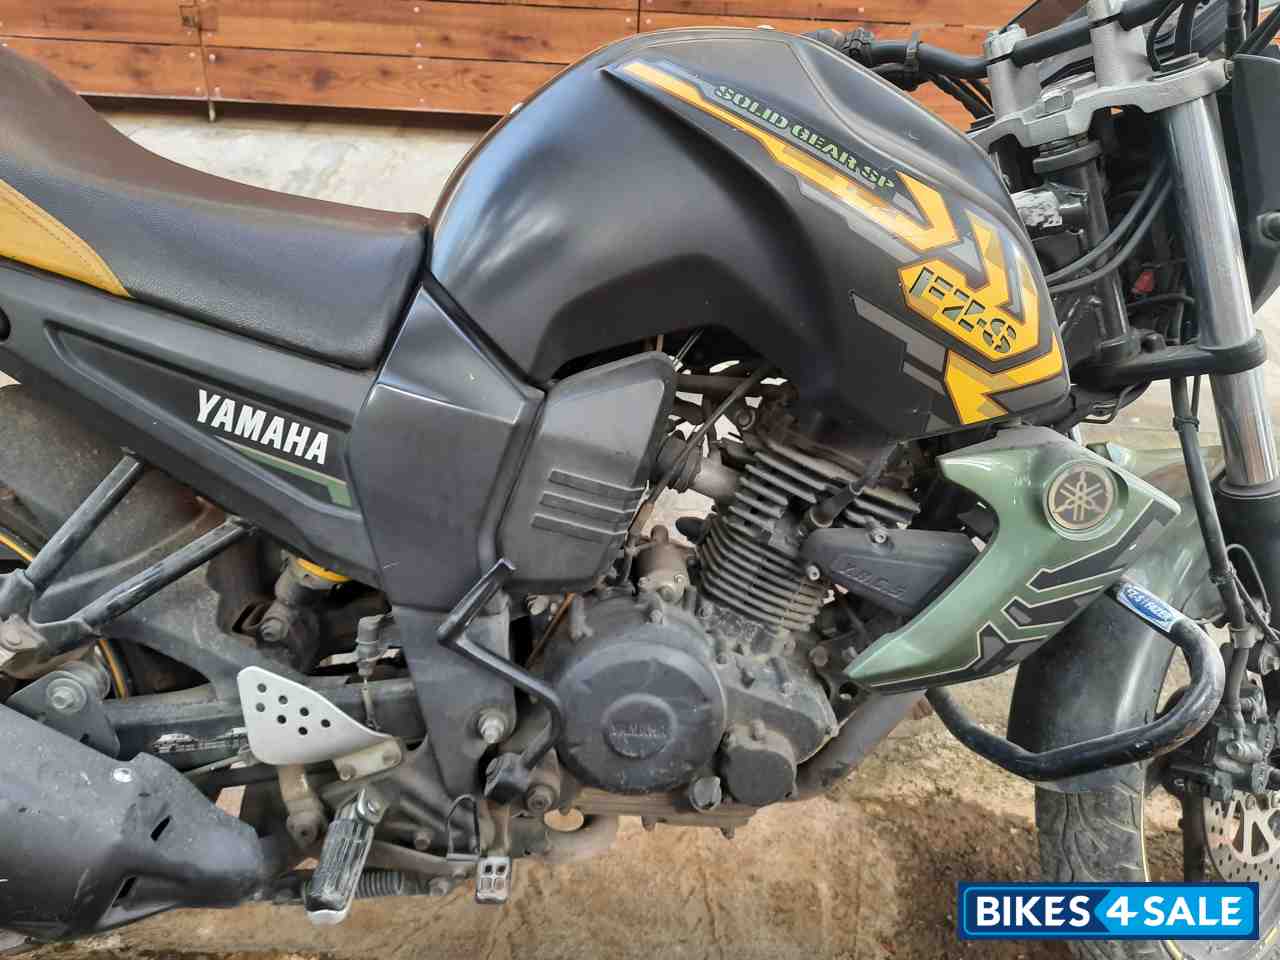 Used 2014 model Yamaha FZ16 for sale in Chennai. ID 303166. Military ...